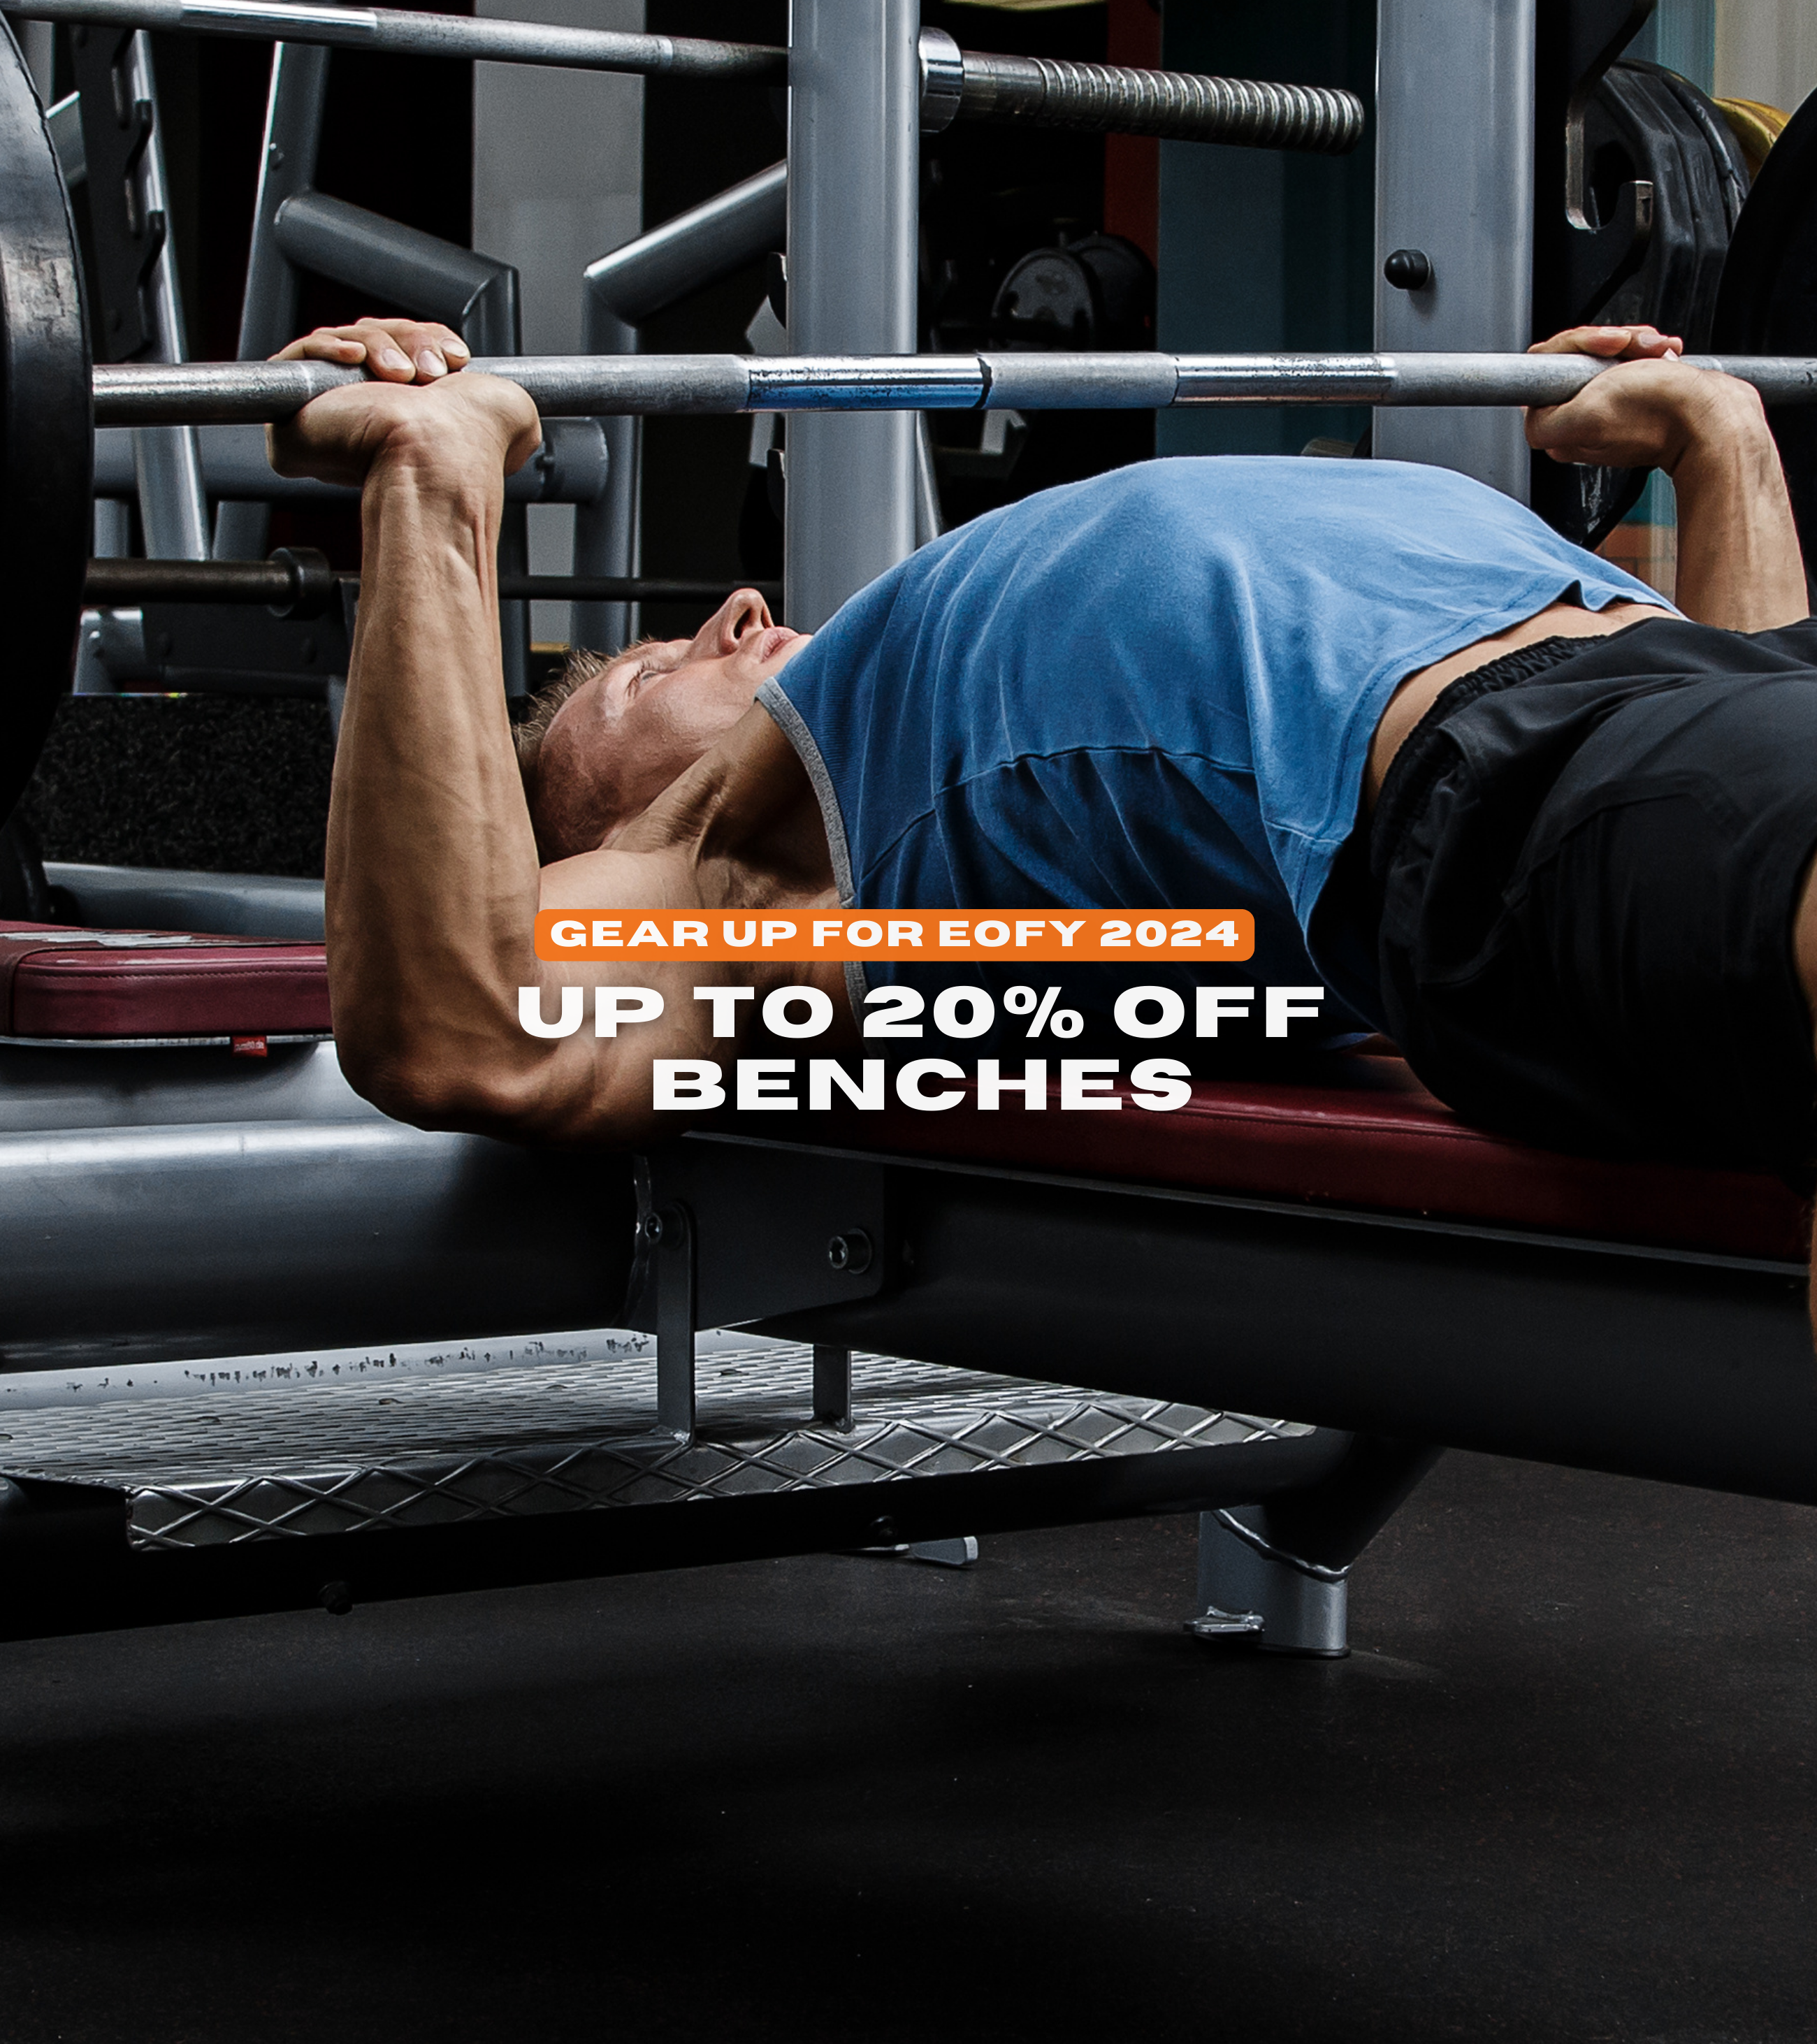 Up To 20% Off Benches